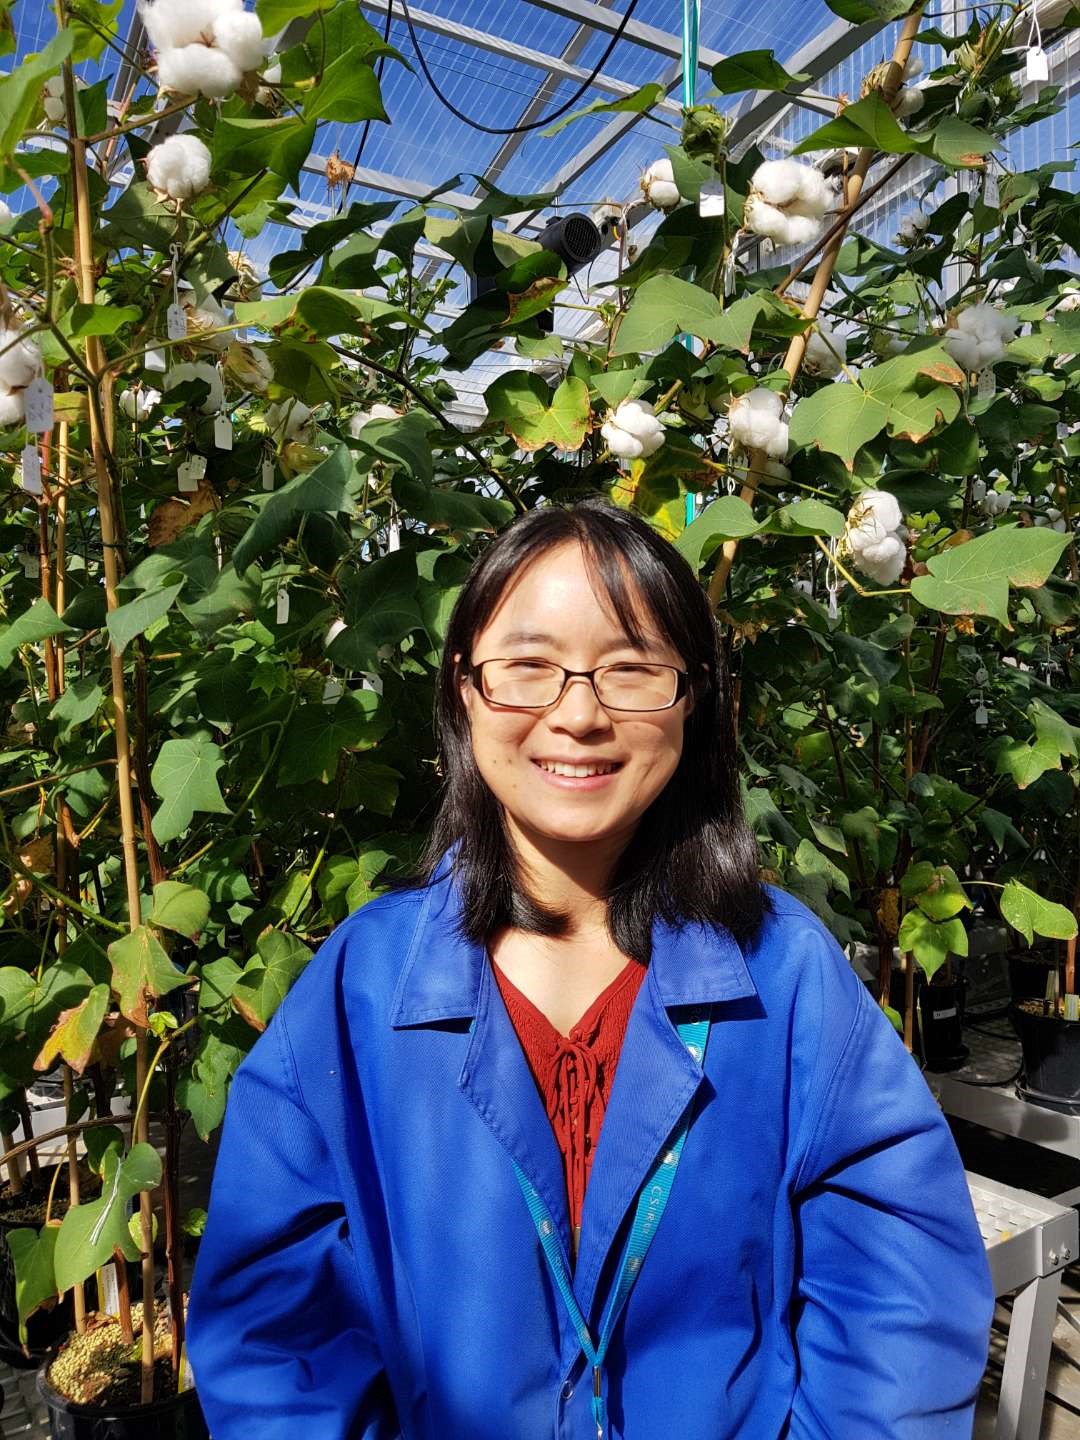 Dr Xiaoqing Li in a blue lab coat standing in front of cotton plants in a hot house